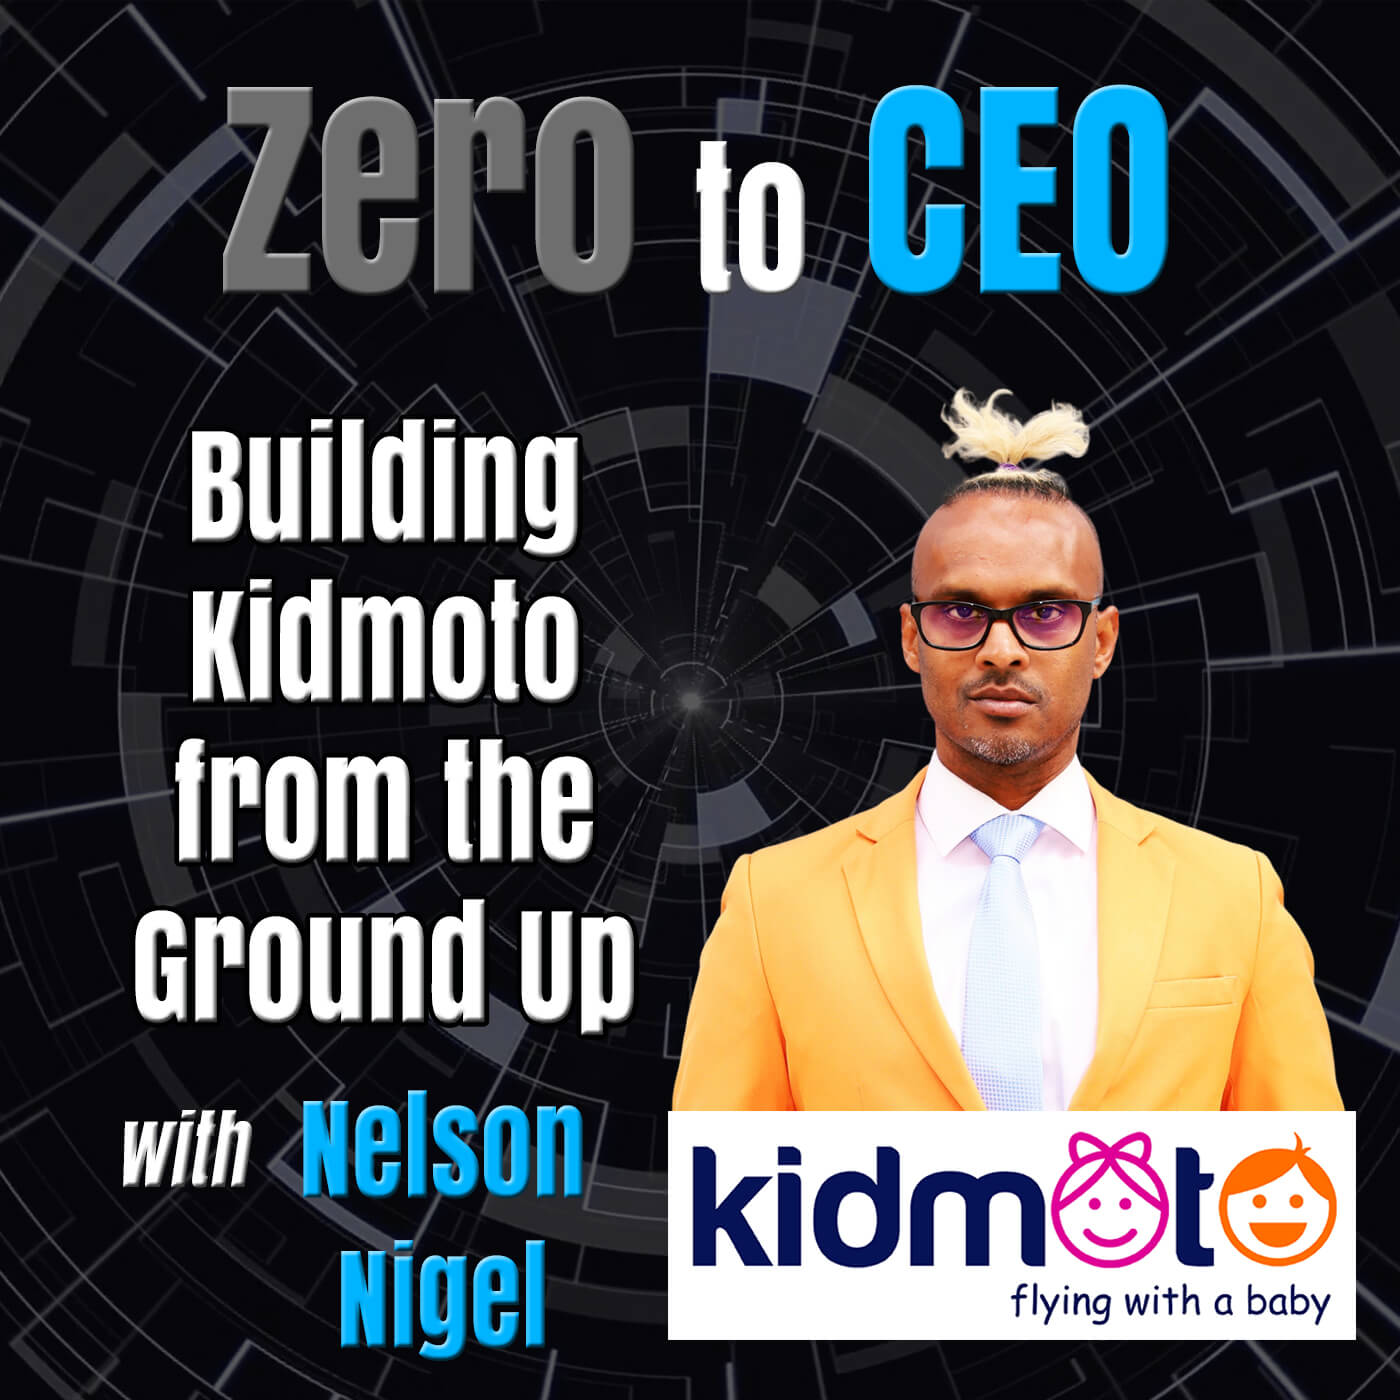 Zero to CEO: Building Kidmoto from the Ground Up with Nelson Nigel